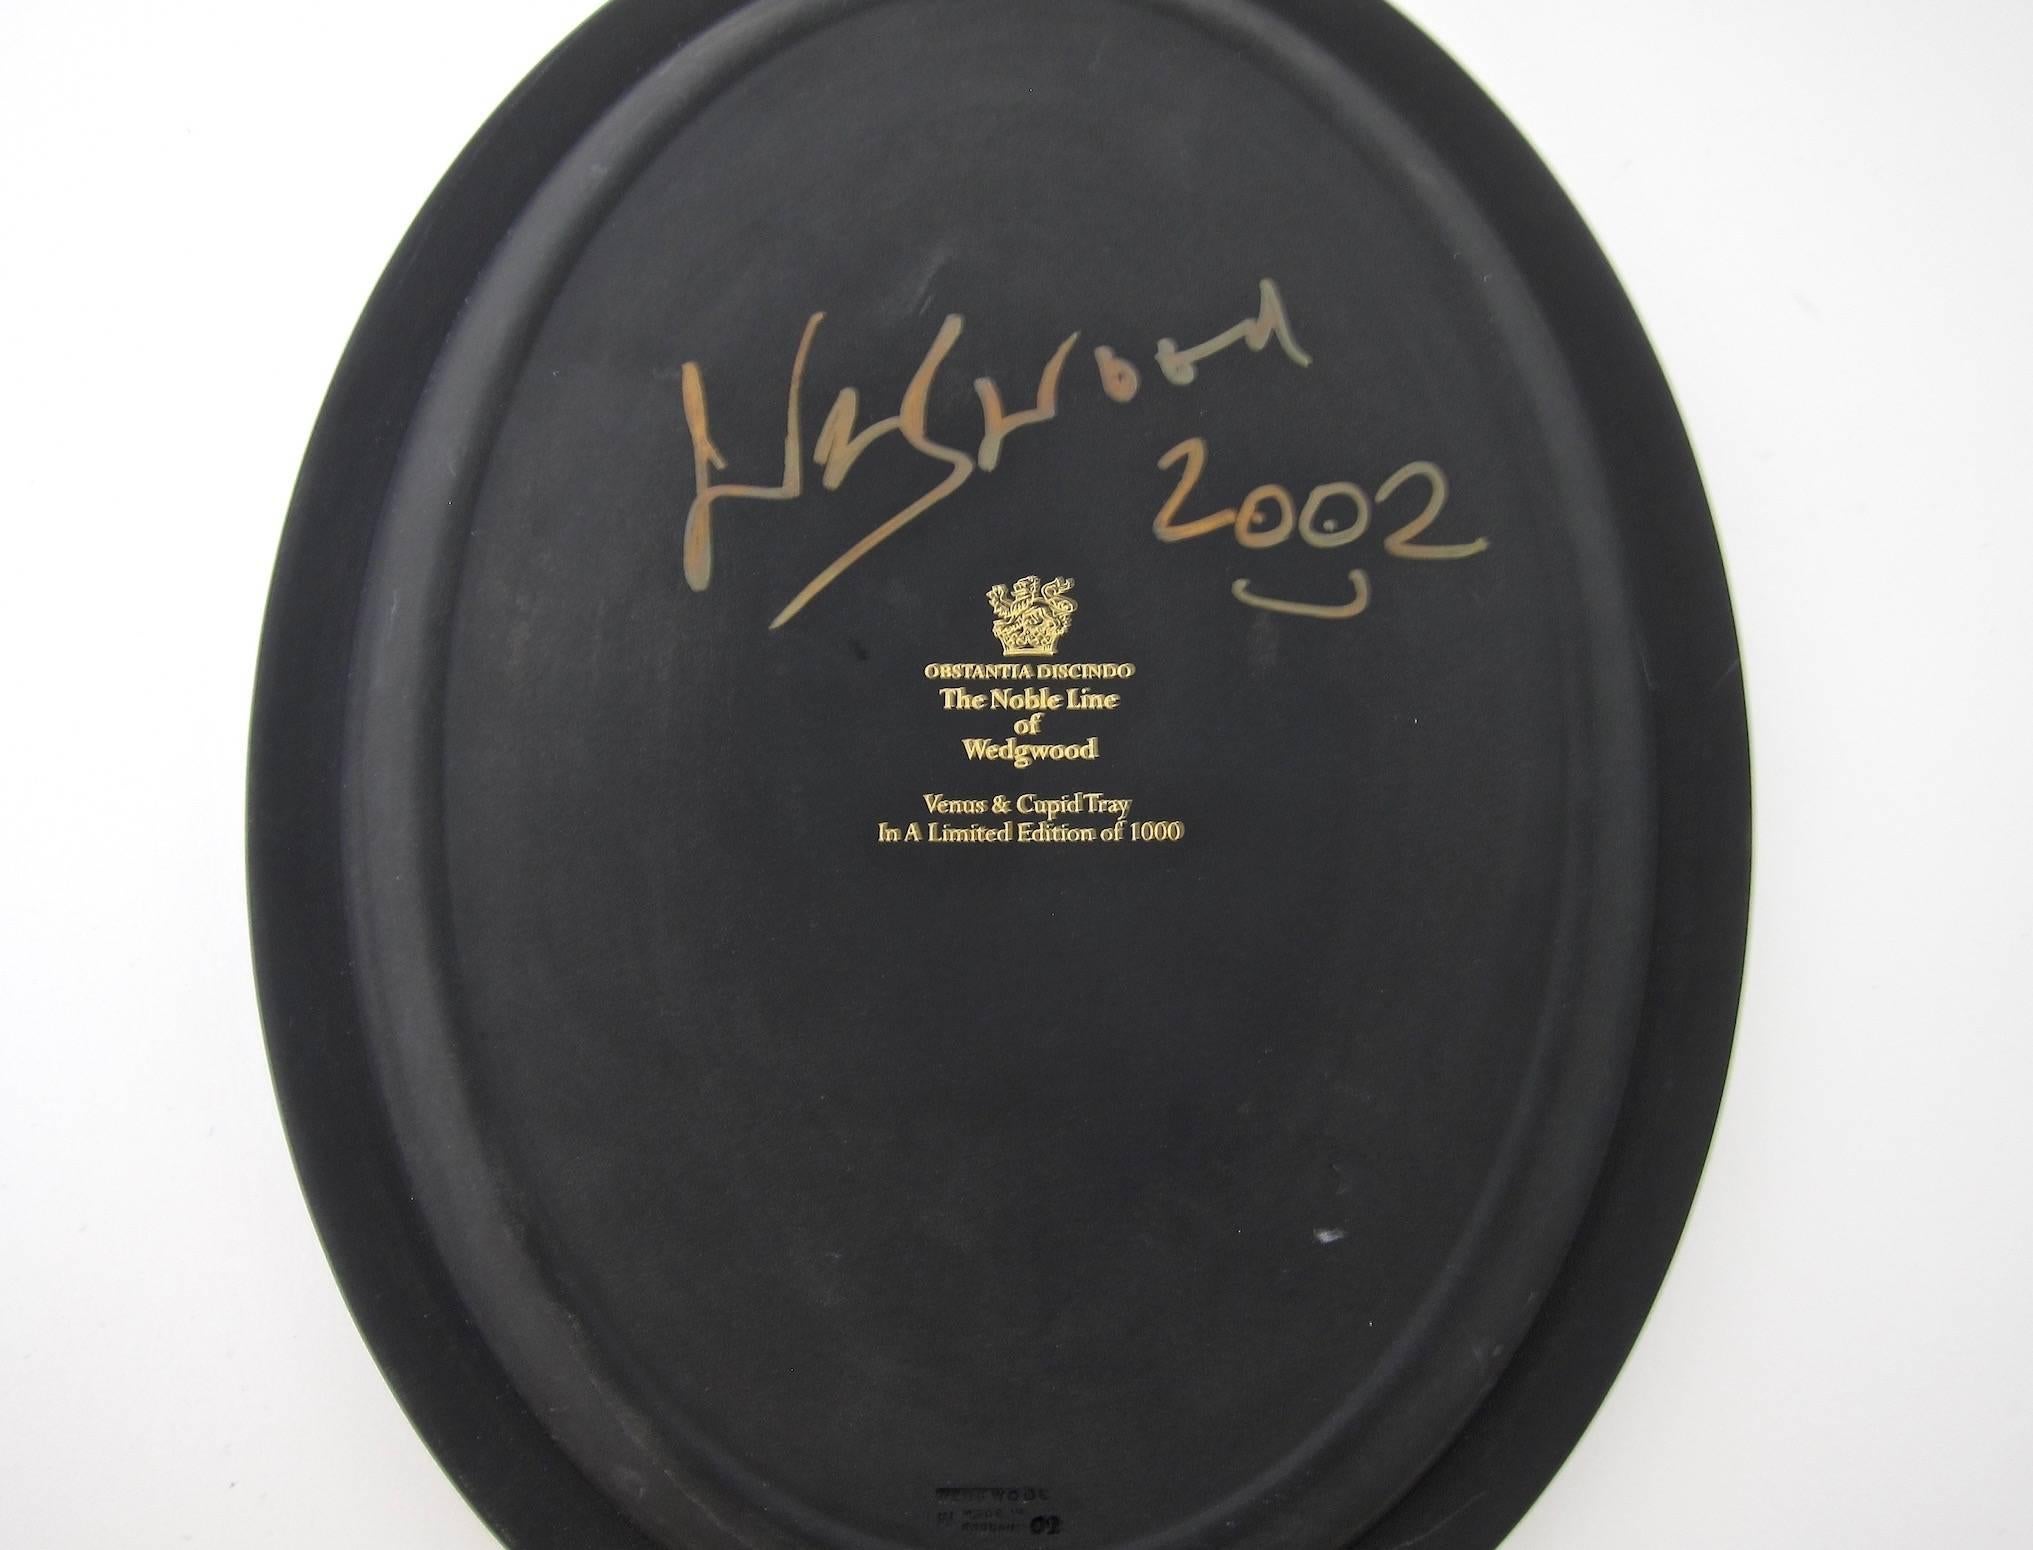 Venus and Cupid Oval Tray Signed by Lord Wedgwood 1